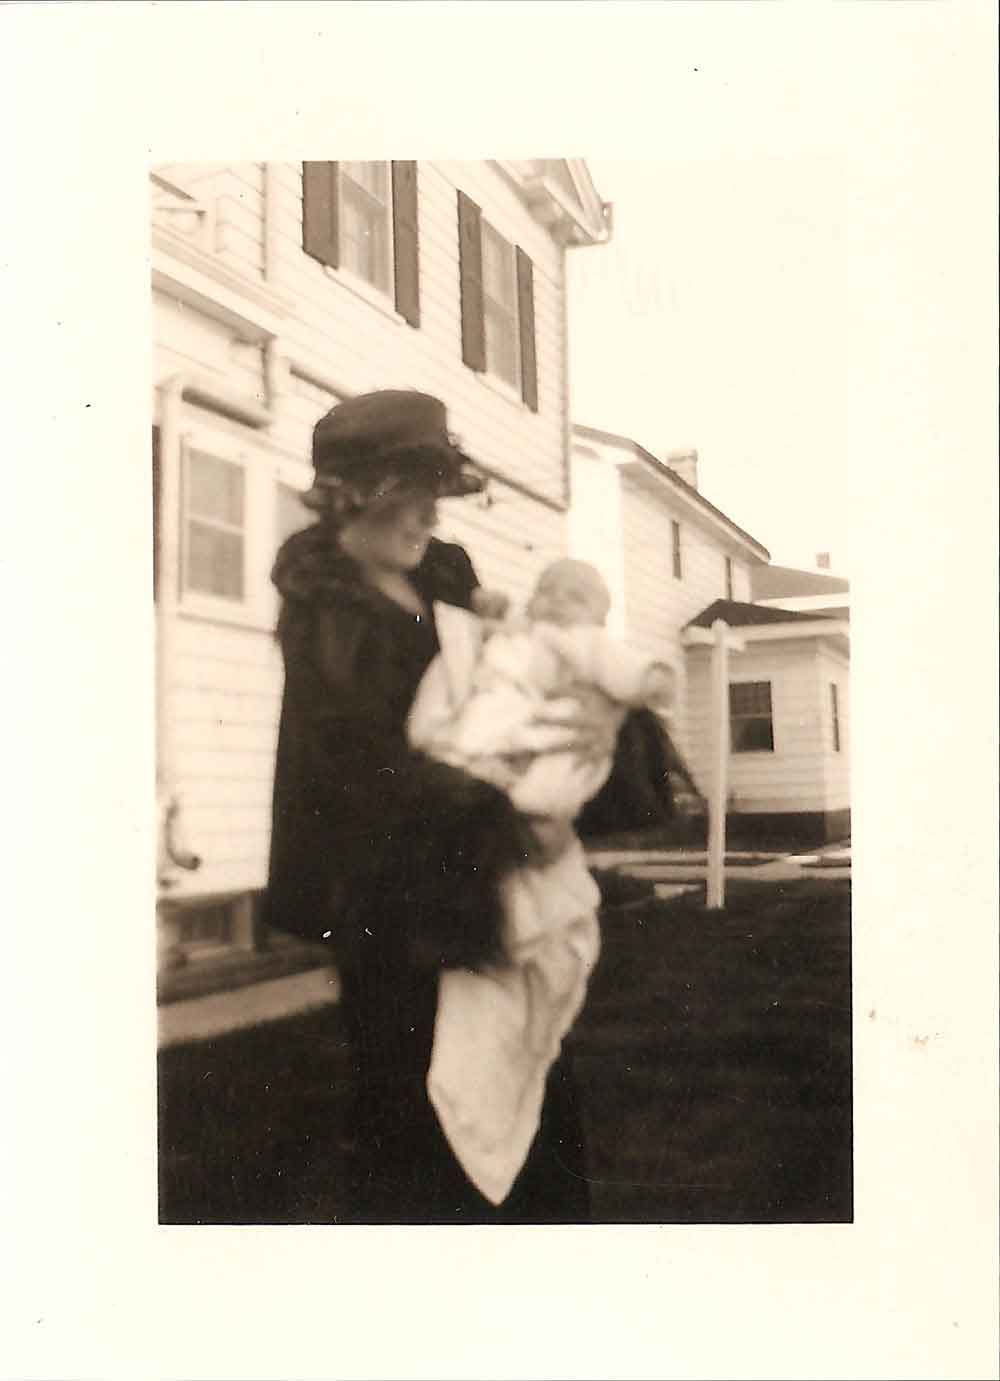 (HTC.2010.8.09) - Woman Holding Infant (possibly Ethelyn Hightower at 409 NW 21), c. 1920s